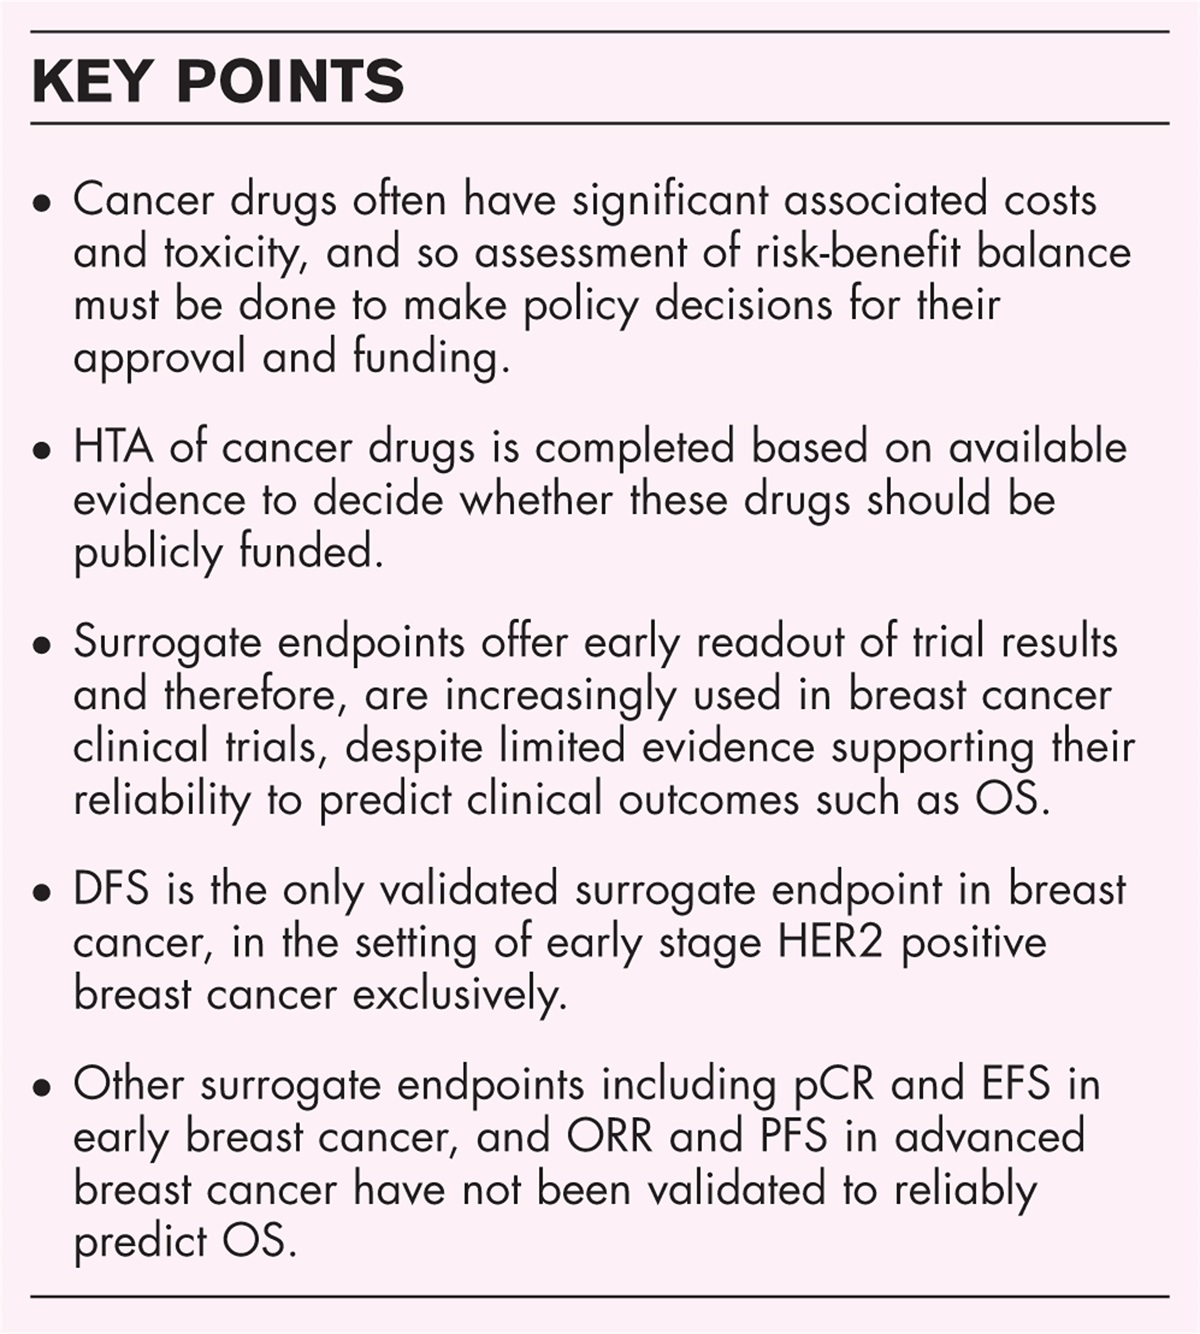 Surrogate endpoints for HTA decisions of breast cancer drugs: utility and pitfalls